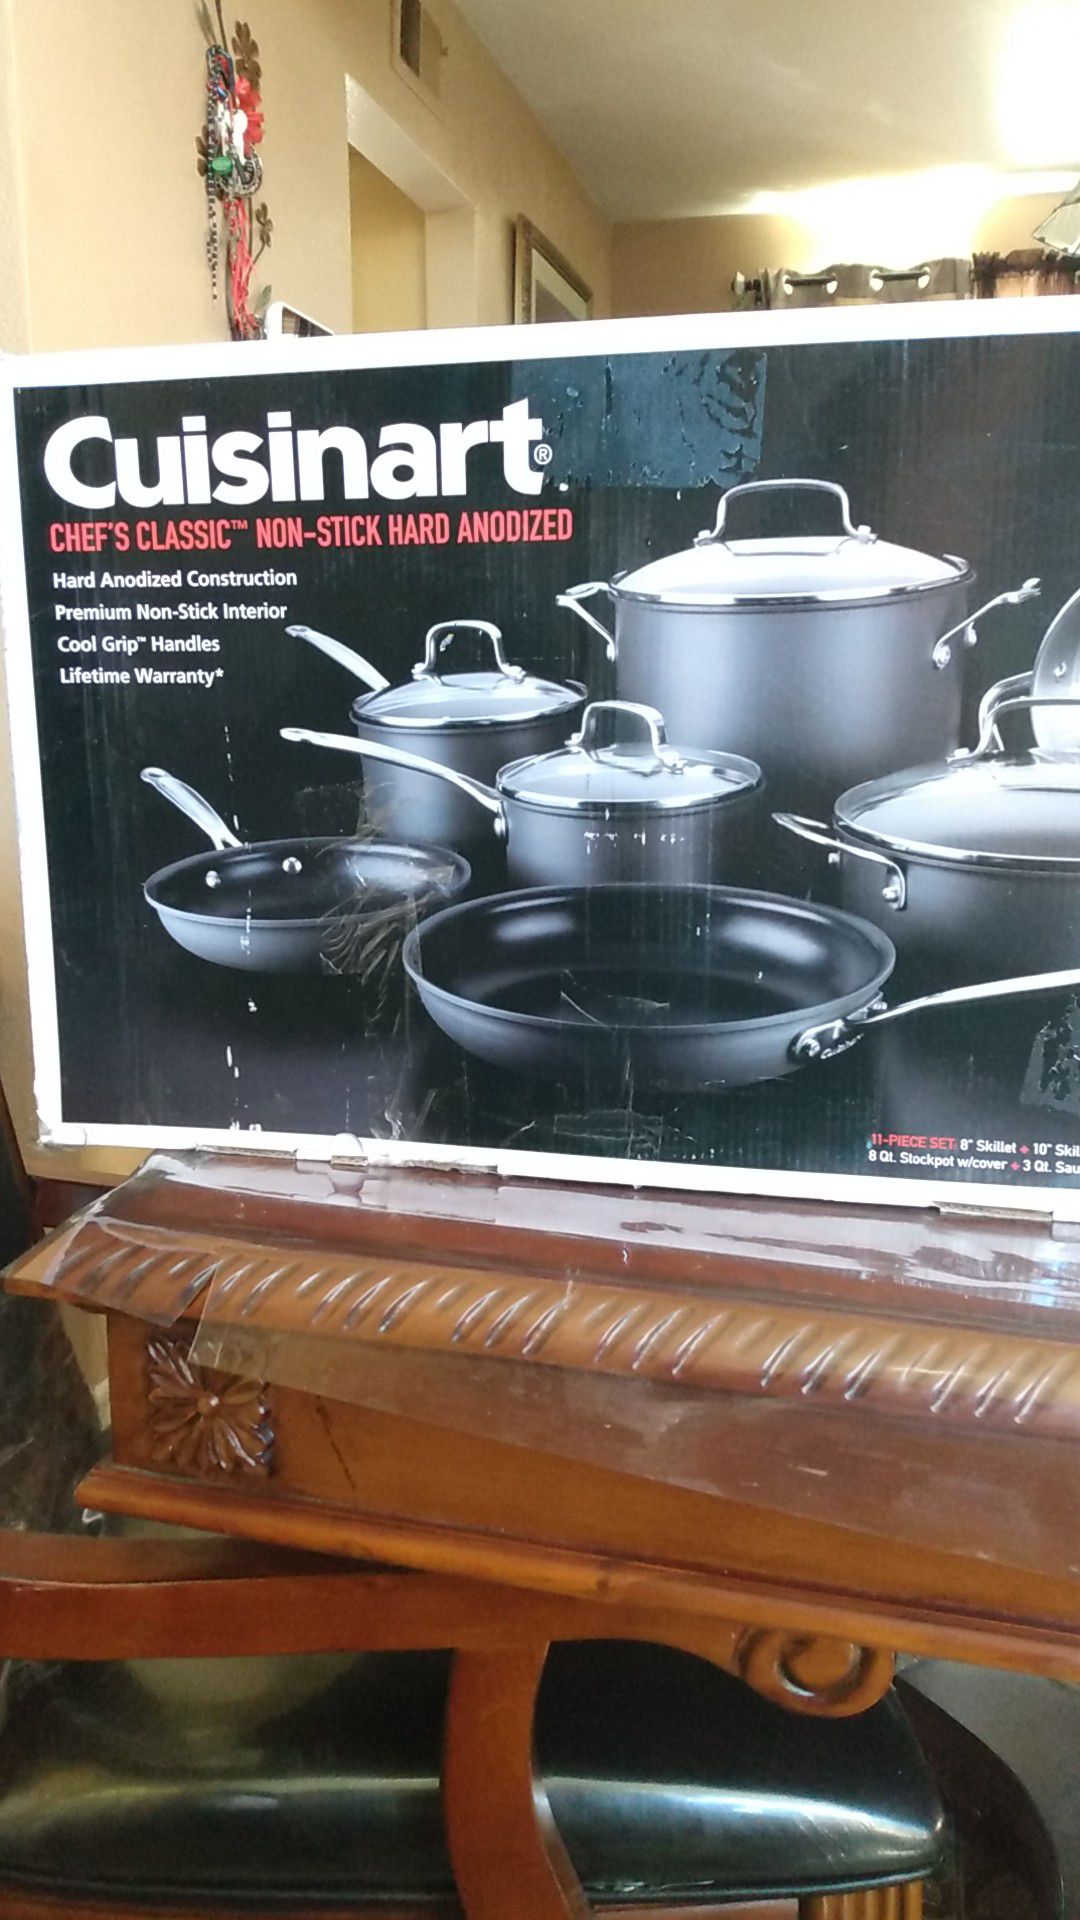 Cuissinart